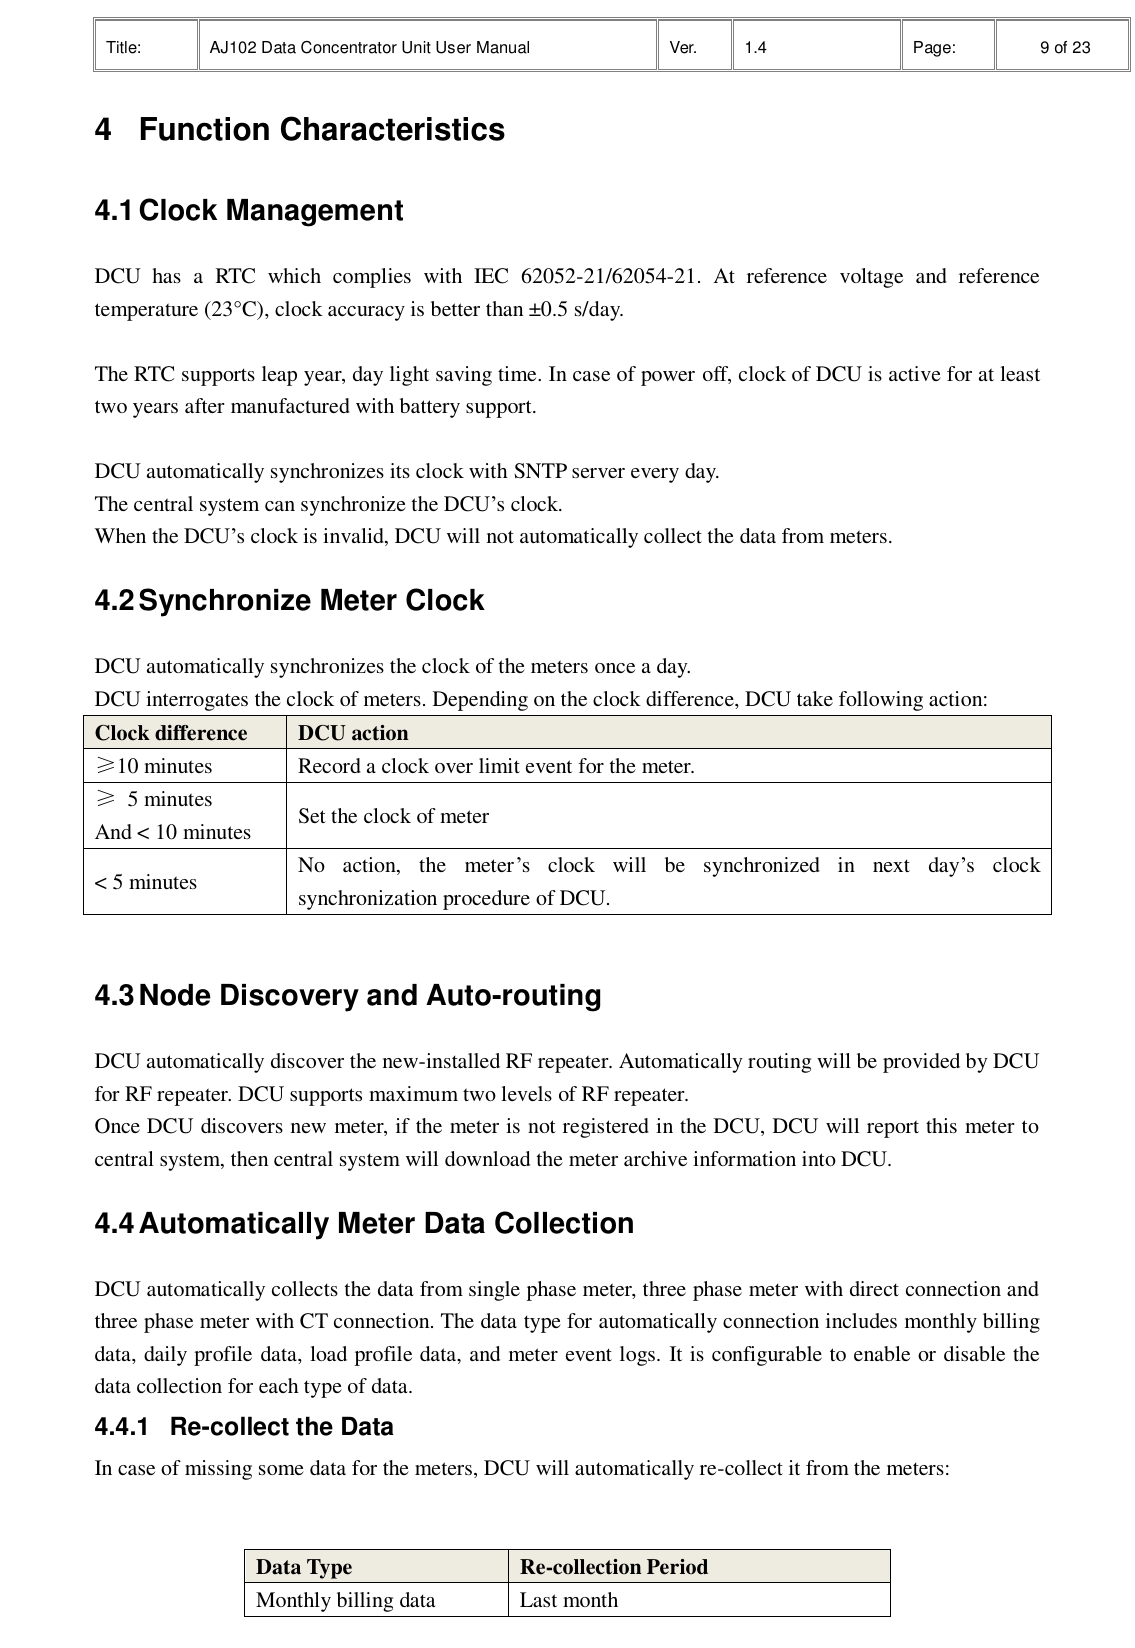 Title: AJ102 Data Concentrator Unit User Manual Ver. 1.4 Page:   9 of 23  4  Function Characteristics 4.1 Clock Management   DCU  has  a  RTC  which  complies  with  IEC  62052-21/62054-21.  At  reference  voltage  and  reference temperature (23°C), clock accuracy is better than ±0.5 s/day.    The RTC supports leap year, day light saving time. In case of power off, clock of DCU is active for at least two years after manufactured with battery support.    DCU automatically synchronizes its clock with SNTP server every day. The central system can synchronize the DCU’s clock. When the DCU’s clock is invalid, DCU will not automatically collect the data from meters. 4.2 Synchronize Meter Clock   DCU automatically synchronizes the clock of the meters once a day. DCU interrogates the clock of meters. Depending on the clock difference, DCU take following action: Clock difference DCU action ≥10 minutes Record a clock over limit event for the meter. ≥  5 minutes And &lt; 10 minutes Set the clock of meter &lt; 5 minutes No  action,  the  meter’s  clock  will  be  synchronized  in  next  day’s  clock synchronization procedure of DCU.  4.3 Node Discovery and Auto-routing DCU automatically discover the new-installed RF repeater. Automatically routing will be provided by DCU for RF repeater. DCU supports maximum two levels of RF repeater.   Once DCU discovers new meter, if the meter is not registered in the DCU, DCU will report this meter to central system, then central system will download the meter archive information into DCU. 4.4 Automatically Meter Data Collection DCU automatically collects the data from single phase meter, three phase meter with direct connection and three phase meter with CT connection. The data type for automatically connection includes monthly billing data, daily profile data, load profile data, and meter event logs. It is configurable to enable or disable the data collection for each type of data. 4.4.1  Re-collect the Data   In case of missing some data for the meters, DCU will automatically re-collect it from the meters:     Data Type Re-collection Period Monthly billing data Last month 